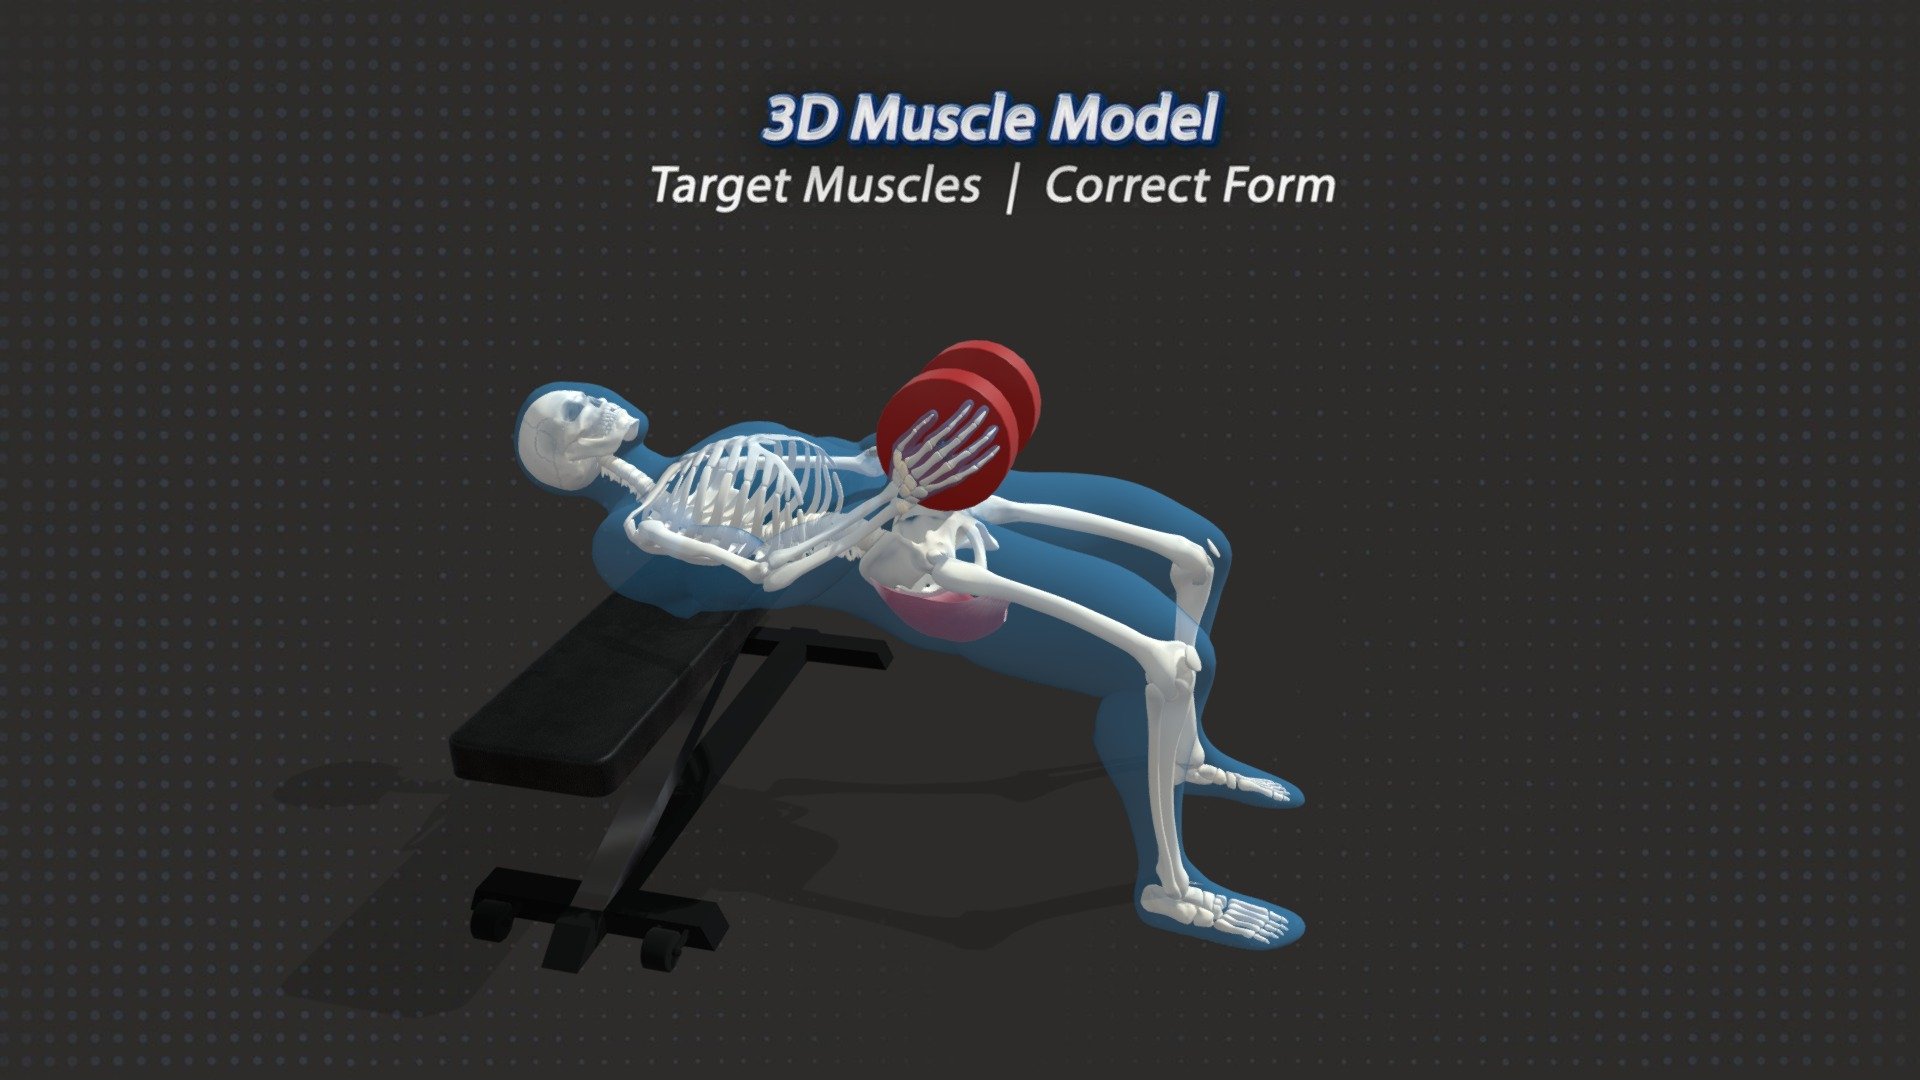 The Dumbbell Hip Thrust is an ideal variation of the popular barbell hip thrust. Works great for at home training. Specifically targets the glutes. 

Visit https://3dmusclemodel.com/ - 52. Dumbbell Hip Thrust - 3D model by Michael Shortall (@mikeshortall1991) 3d model